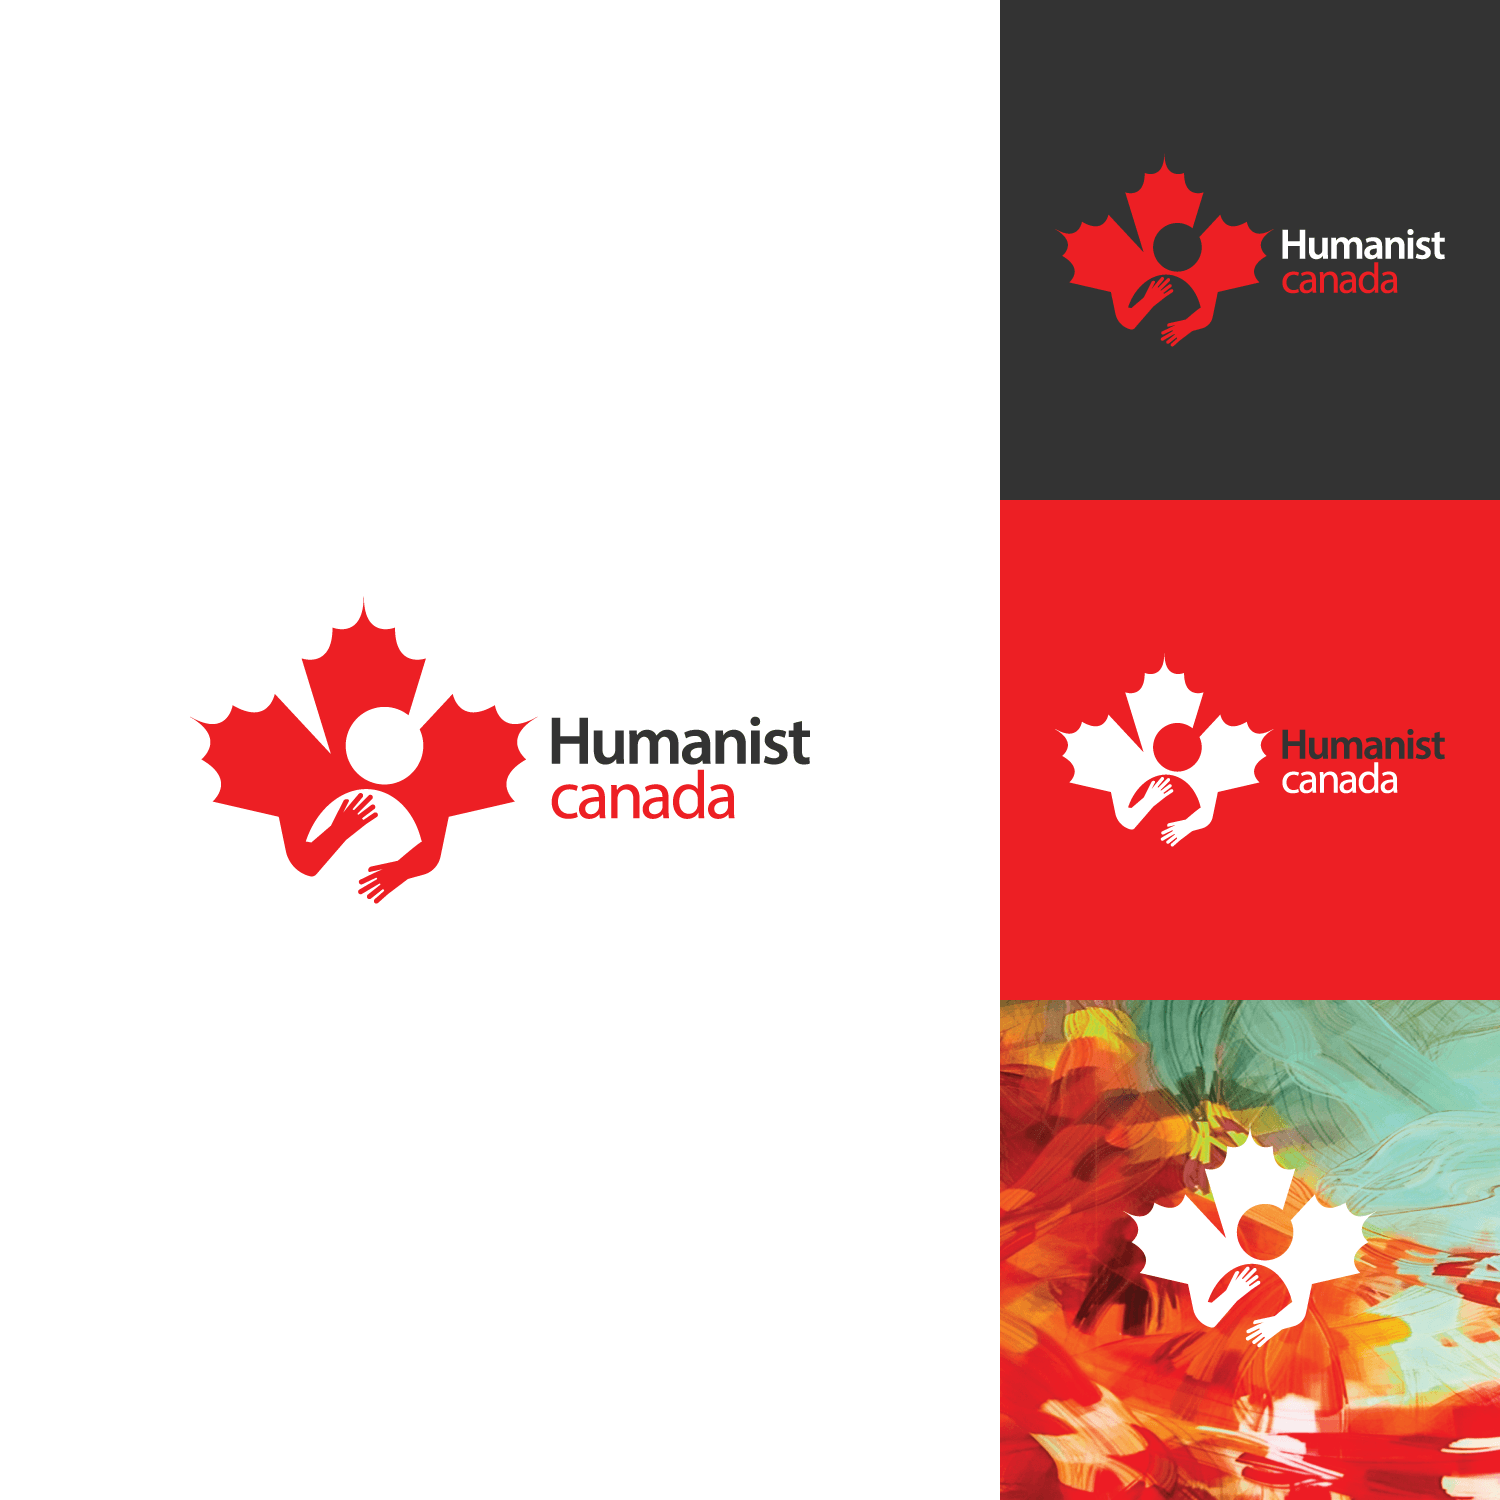 Red Maple Leaf of a Word Logo - Modern, Professional Logo Design for Humanist Canada. Logo can be